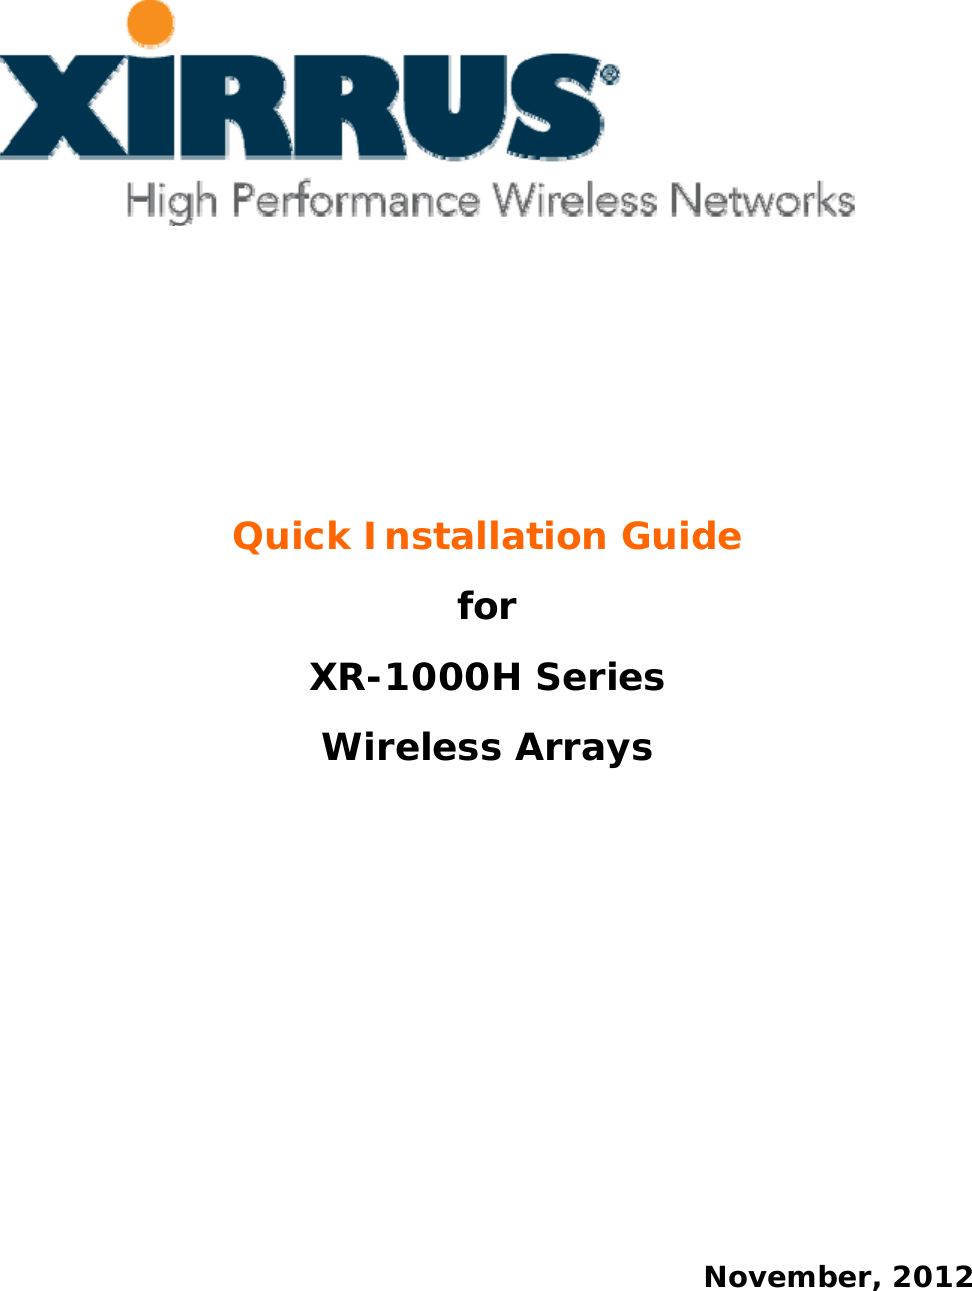 Quick Installation Guide for XR-1000H Series Wireless Arrays         November, 2012 